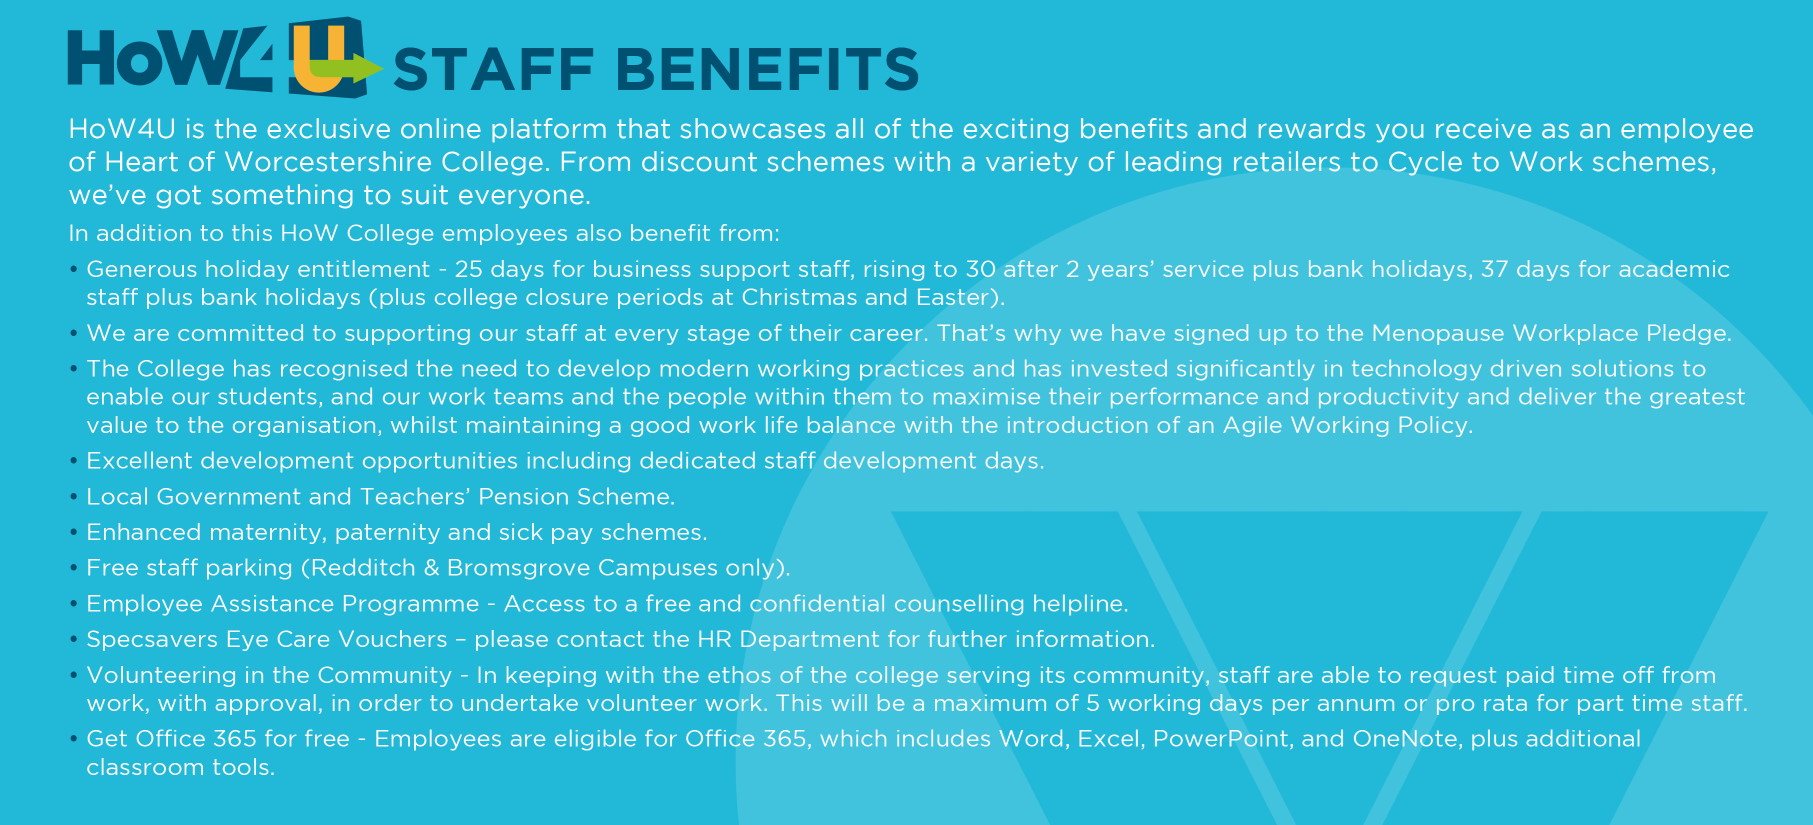 STAFF BENEFITS HoW4U is the exclusive online platform that showcases all of the exciting benefits and rewards you receive as an employee of Heart of Worcestershire College. 
             From discount schemes with a variety of leading retailers to Cycle to Work schemes, we've got something to suit everyone. In addition to this, HoW College employees also benefit from:
             - Generous holiday entitlement - 25 days for business support staff, to 30 after 2 years' service & 37 days for academic staff (plus bank holidays).
             - 2 week Christmas closure and 1 week Easter closure for staff. - Local Government and Teachers' Pension Scheme. 
             - Excellent development opportunities including staff development days. - Employee Assistance Programme (access to a free and confidentia\ counselling helpline). 
             - Volunteering in the Community - Staff are able to request paid time off from work, with approval, in order to undertake volunteer work. - Free staff parking (Redditch & Bromsgrove Campuses only). 